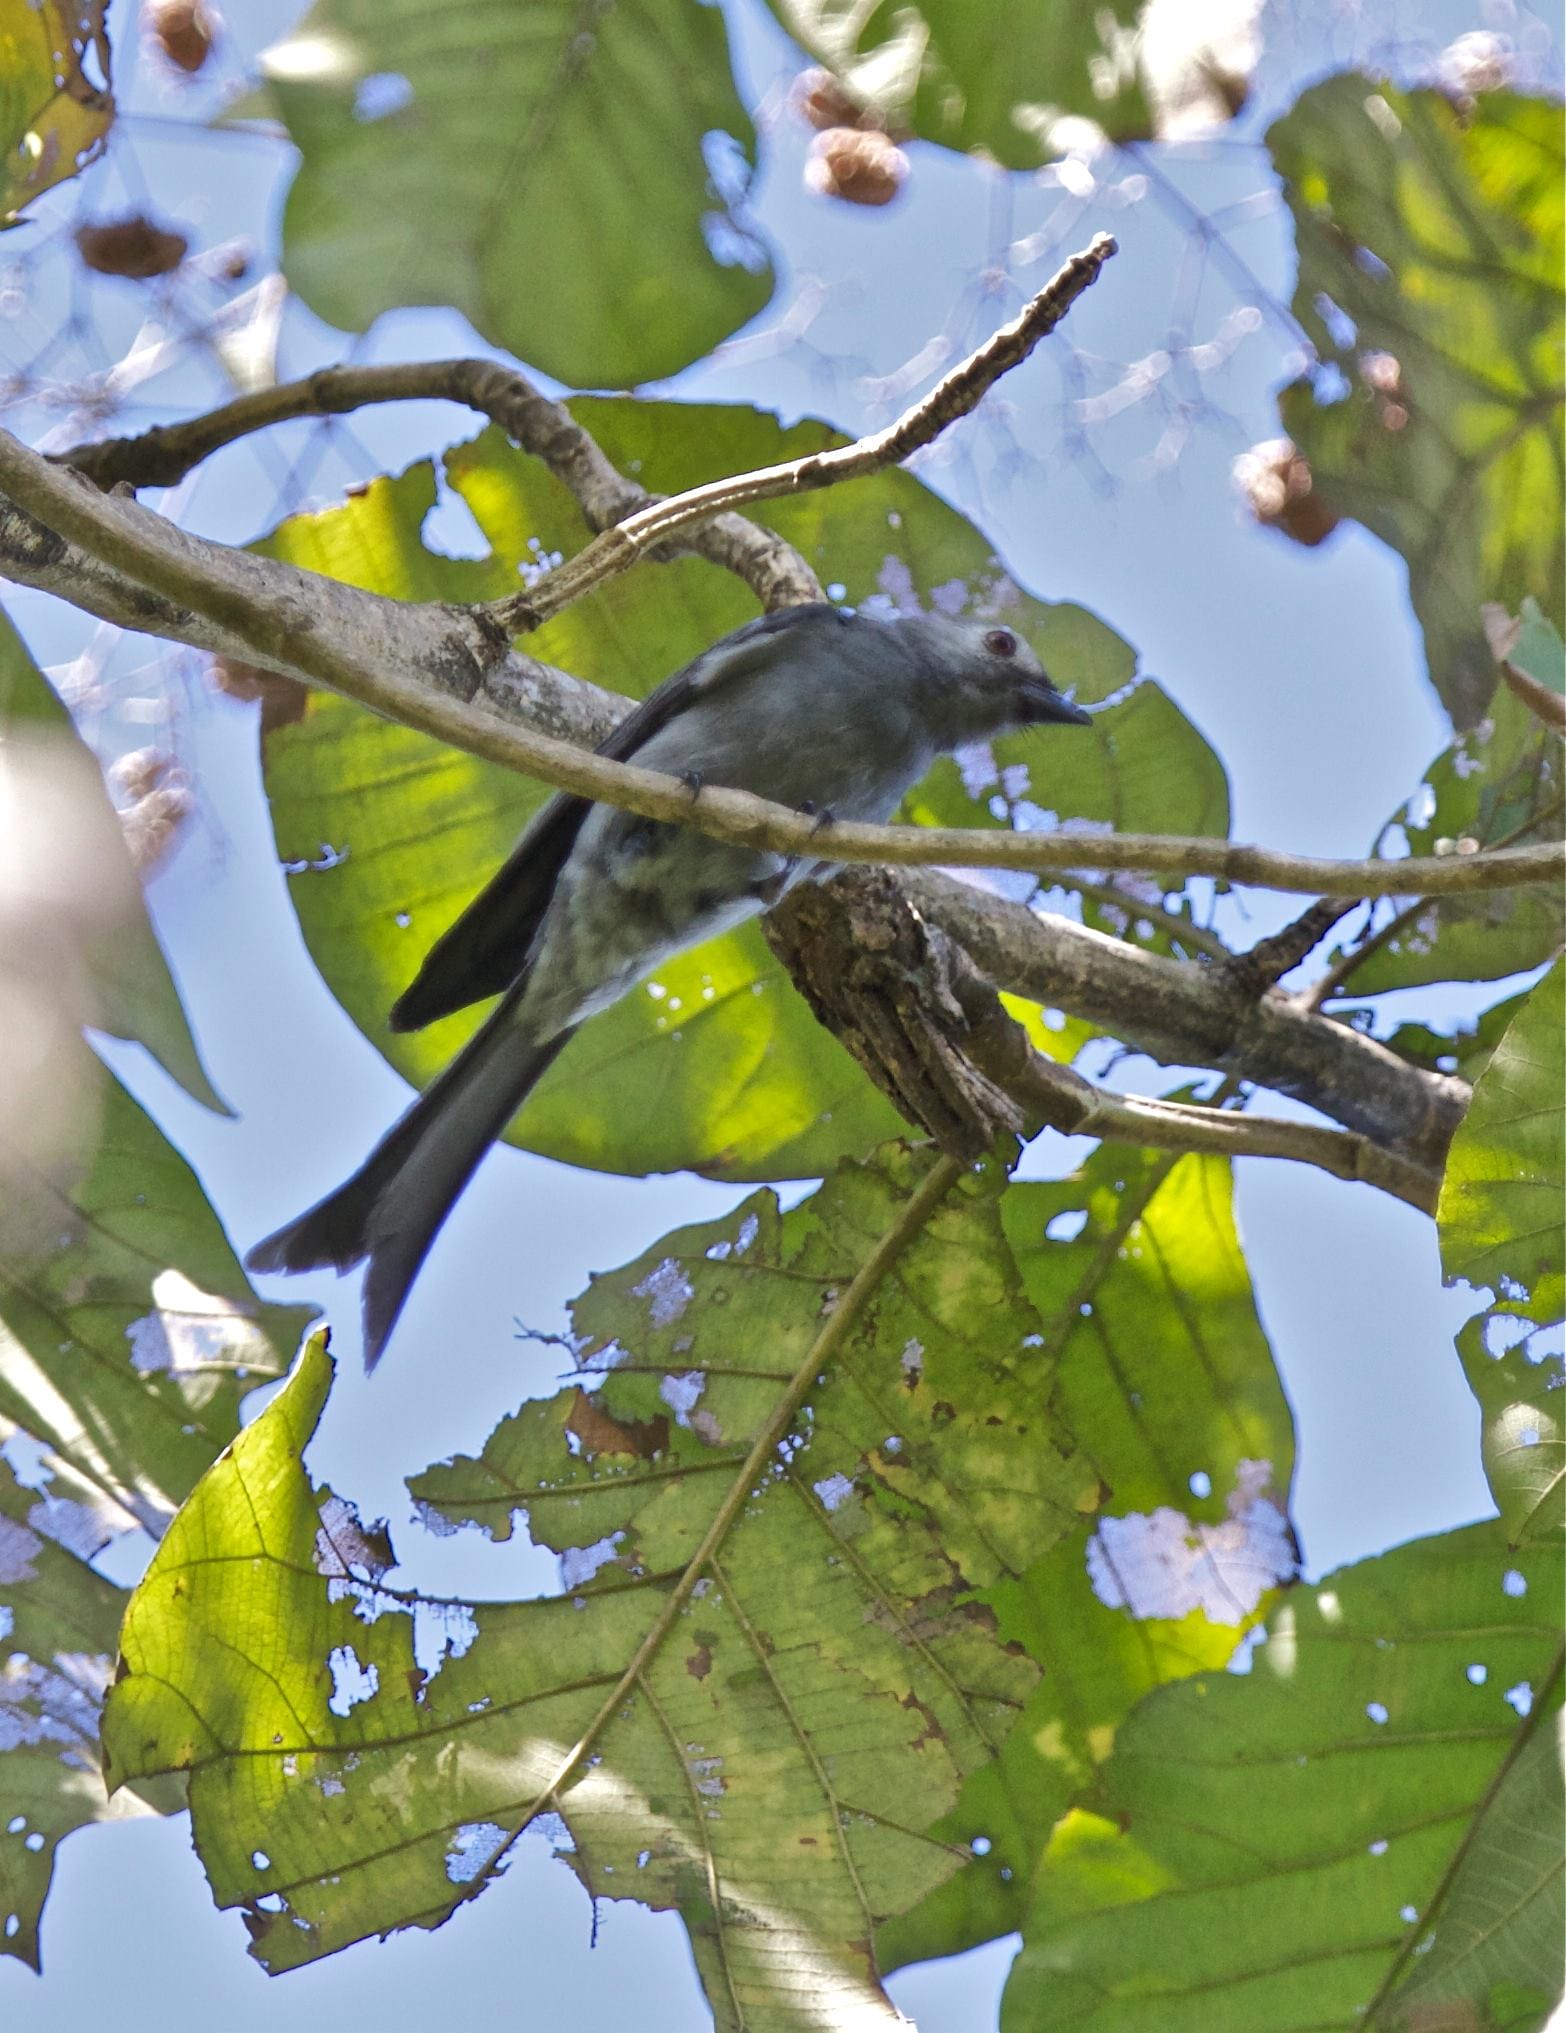 Ashy Drongo in UP Diliman, Quezon City (31 January 2015.) Photo by Bert Madrigal.